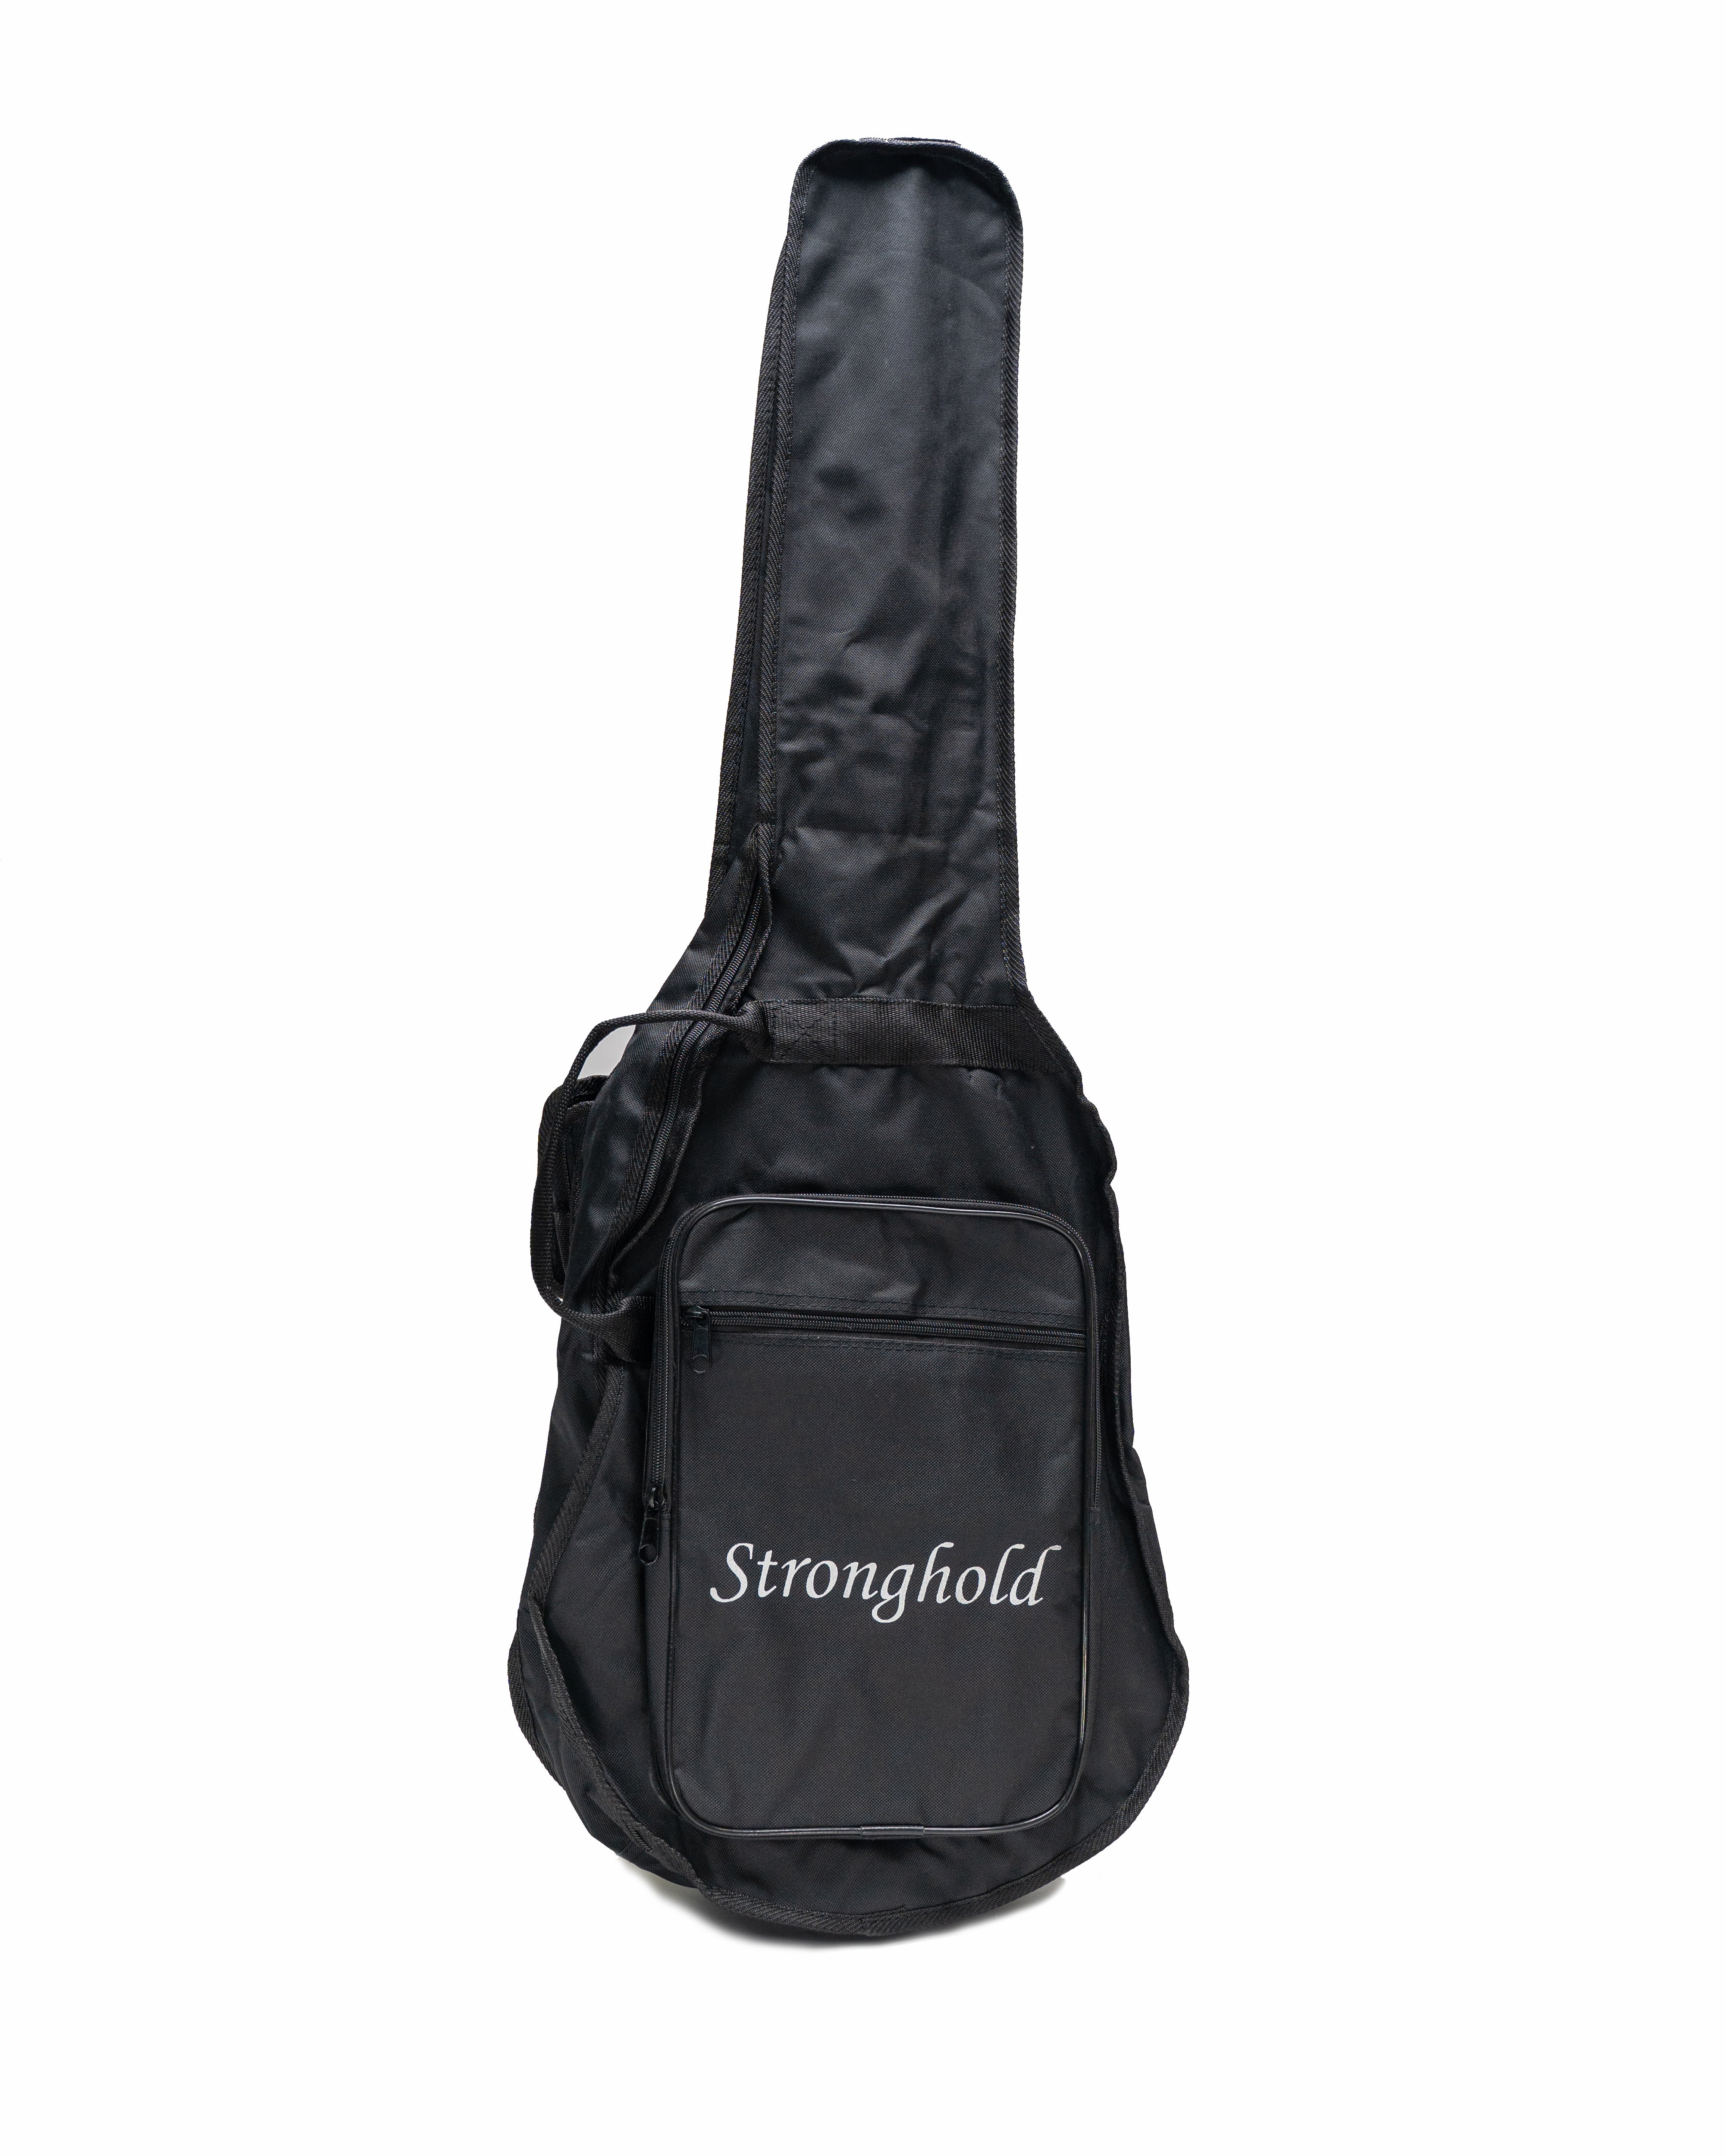 Stronghold GB-E Economic Electric Guitar Bag